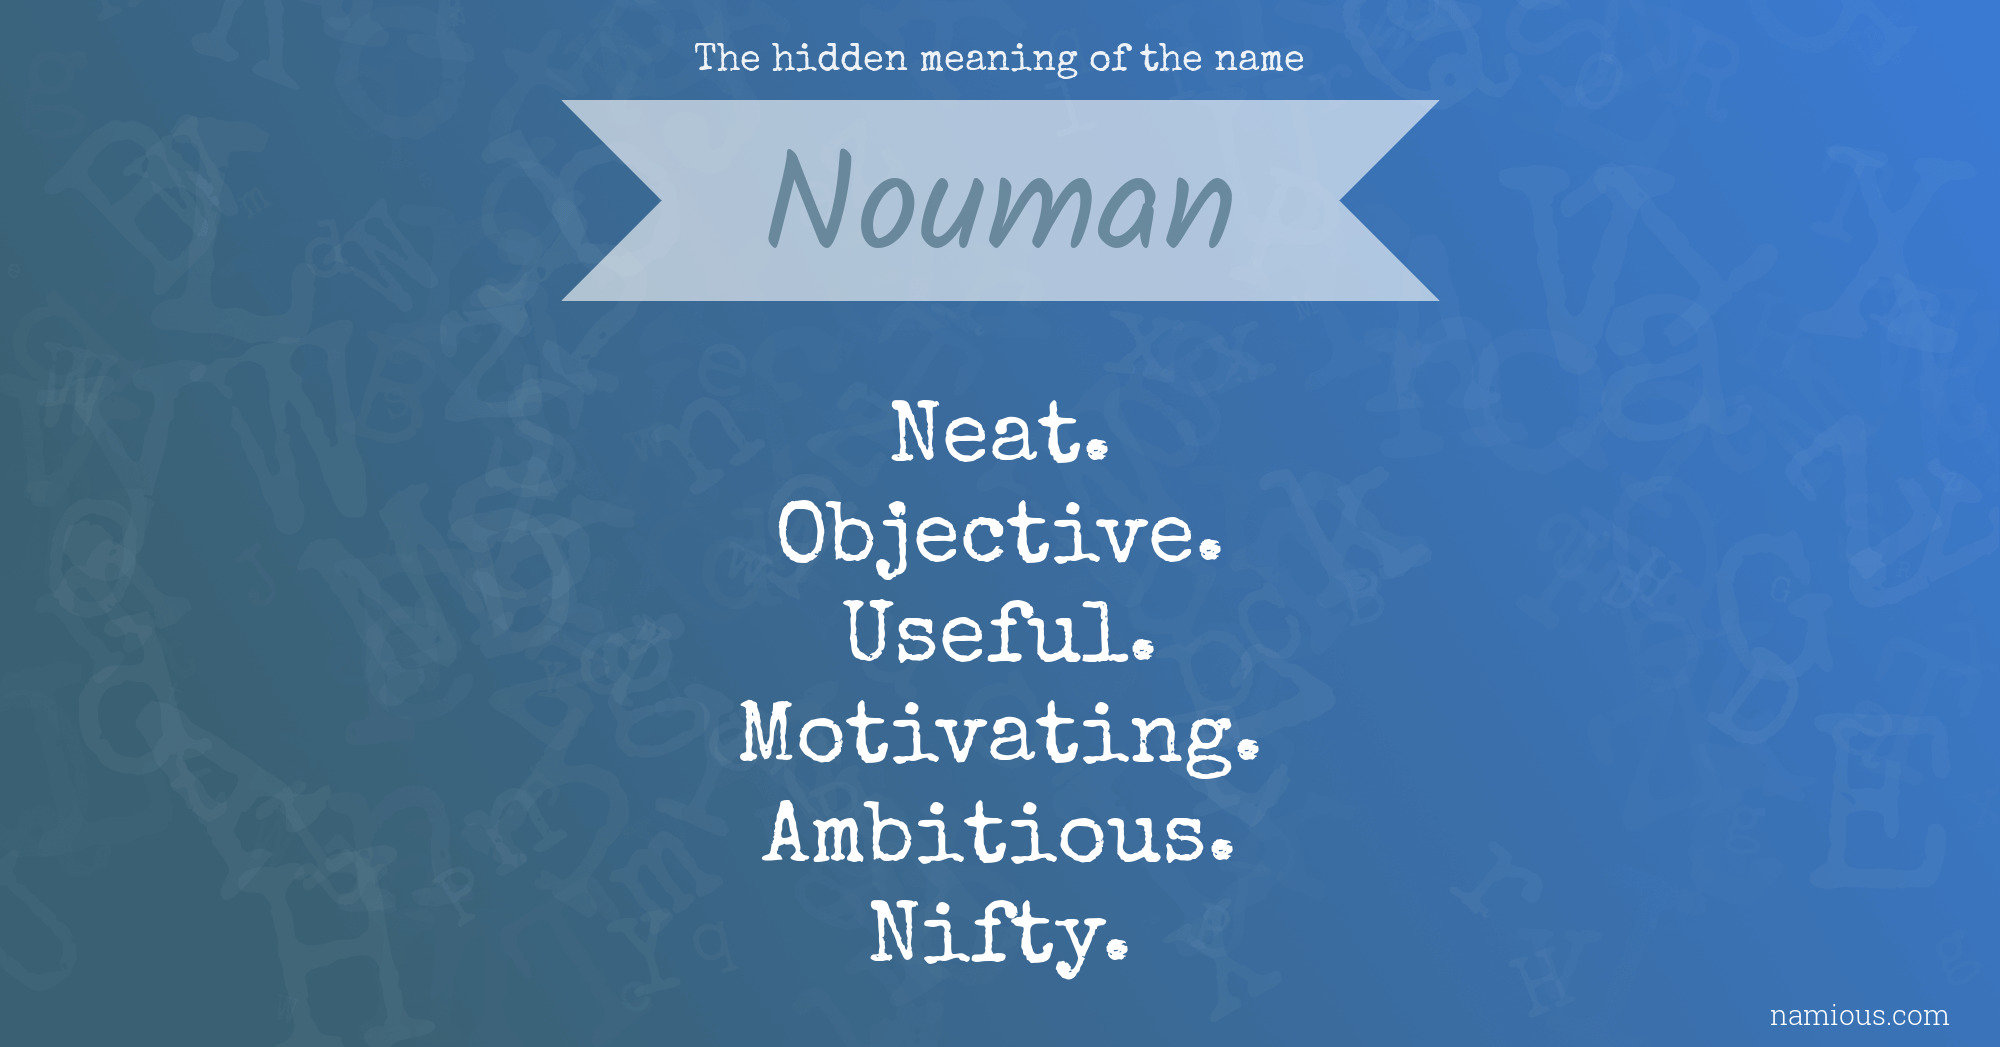 The hidden meaning of the name Nouman